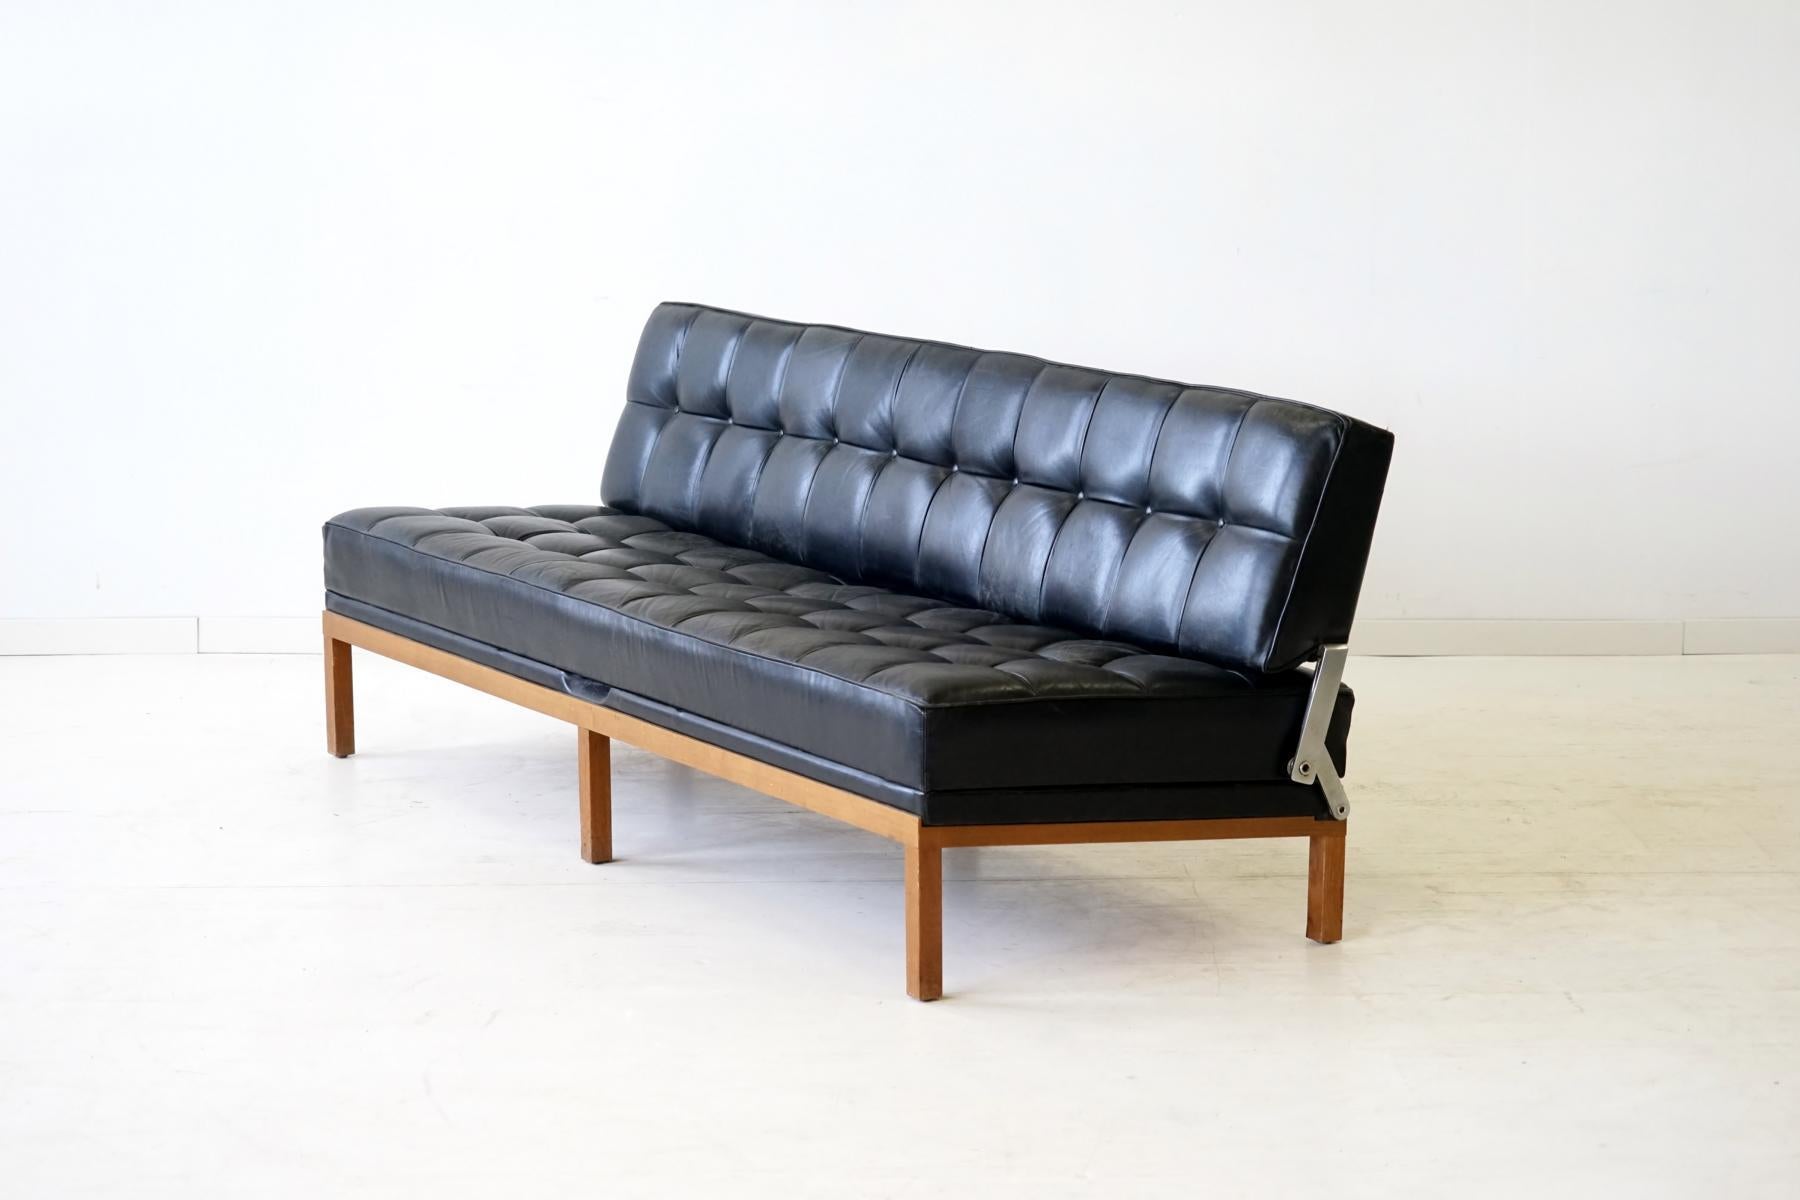 German Sofa / Daybed Constance by Johannes Spalt for Wittmann, 1961